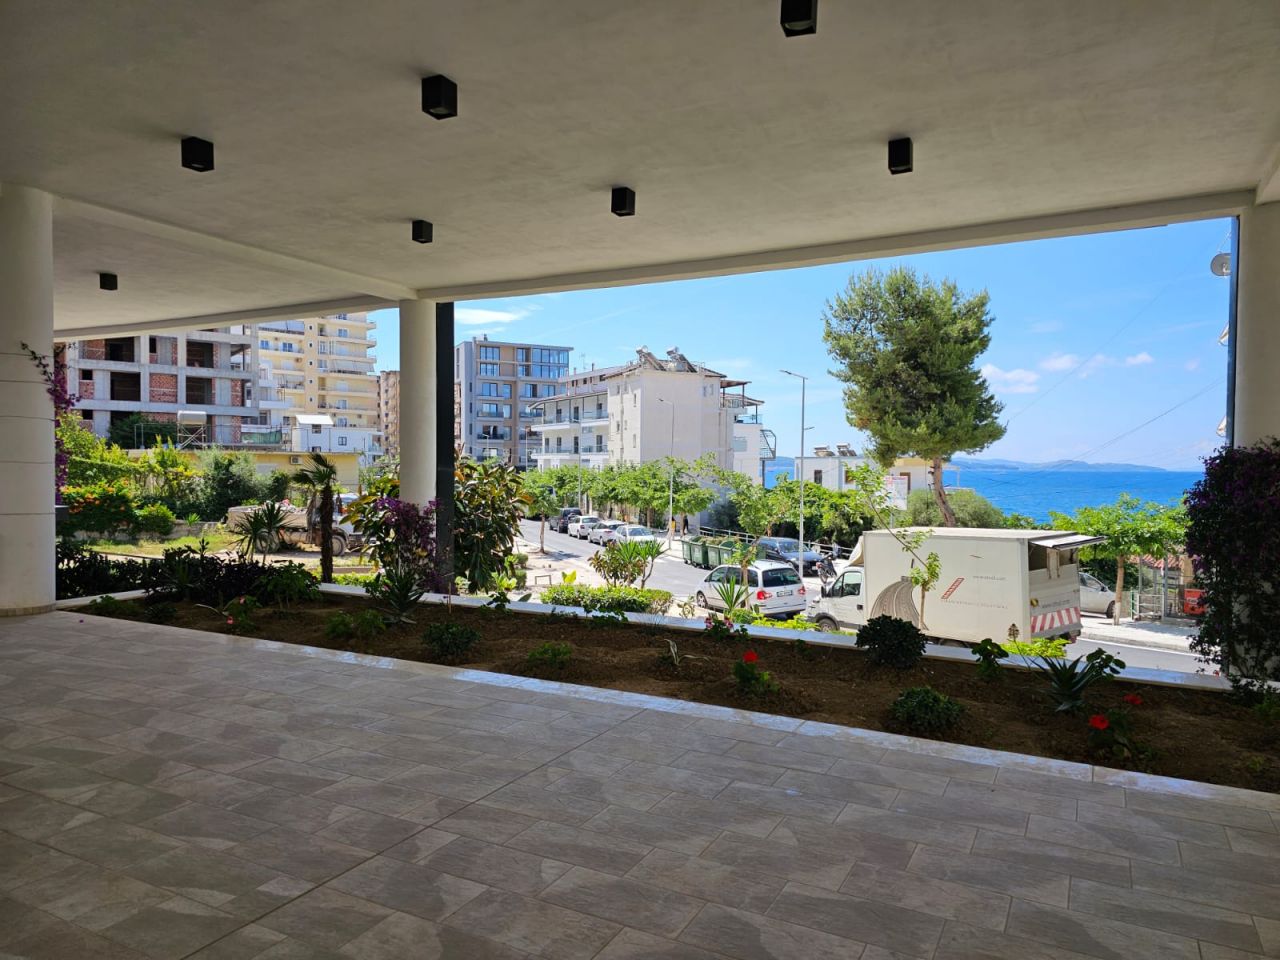 One Bedroom Apartment For Sale In Saranda Albania Located In A Well Organized Neighborhood With Wonderful Sea View